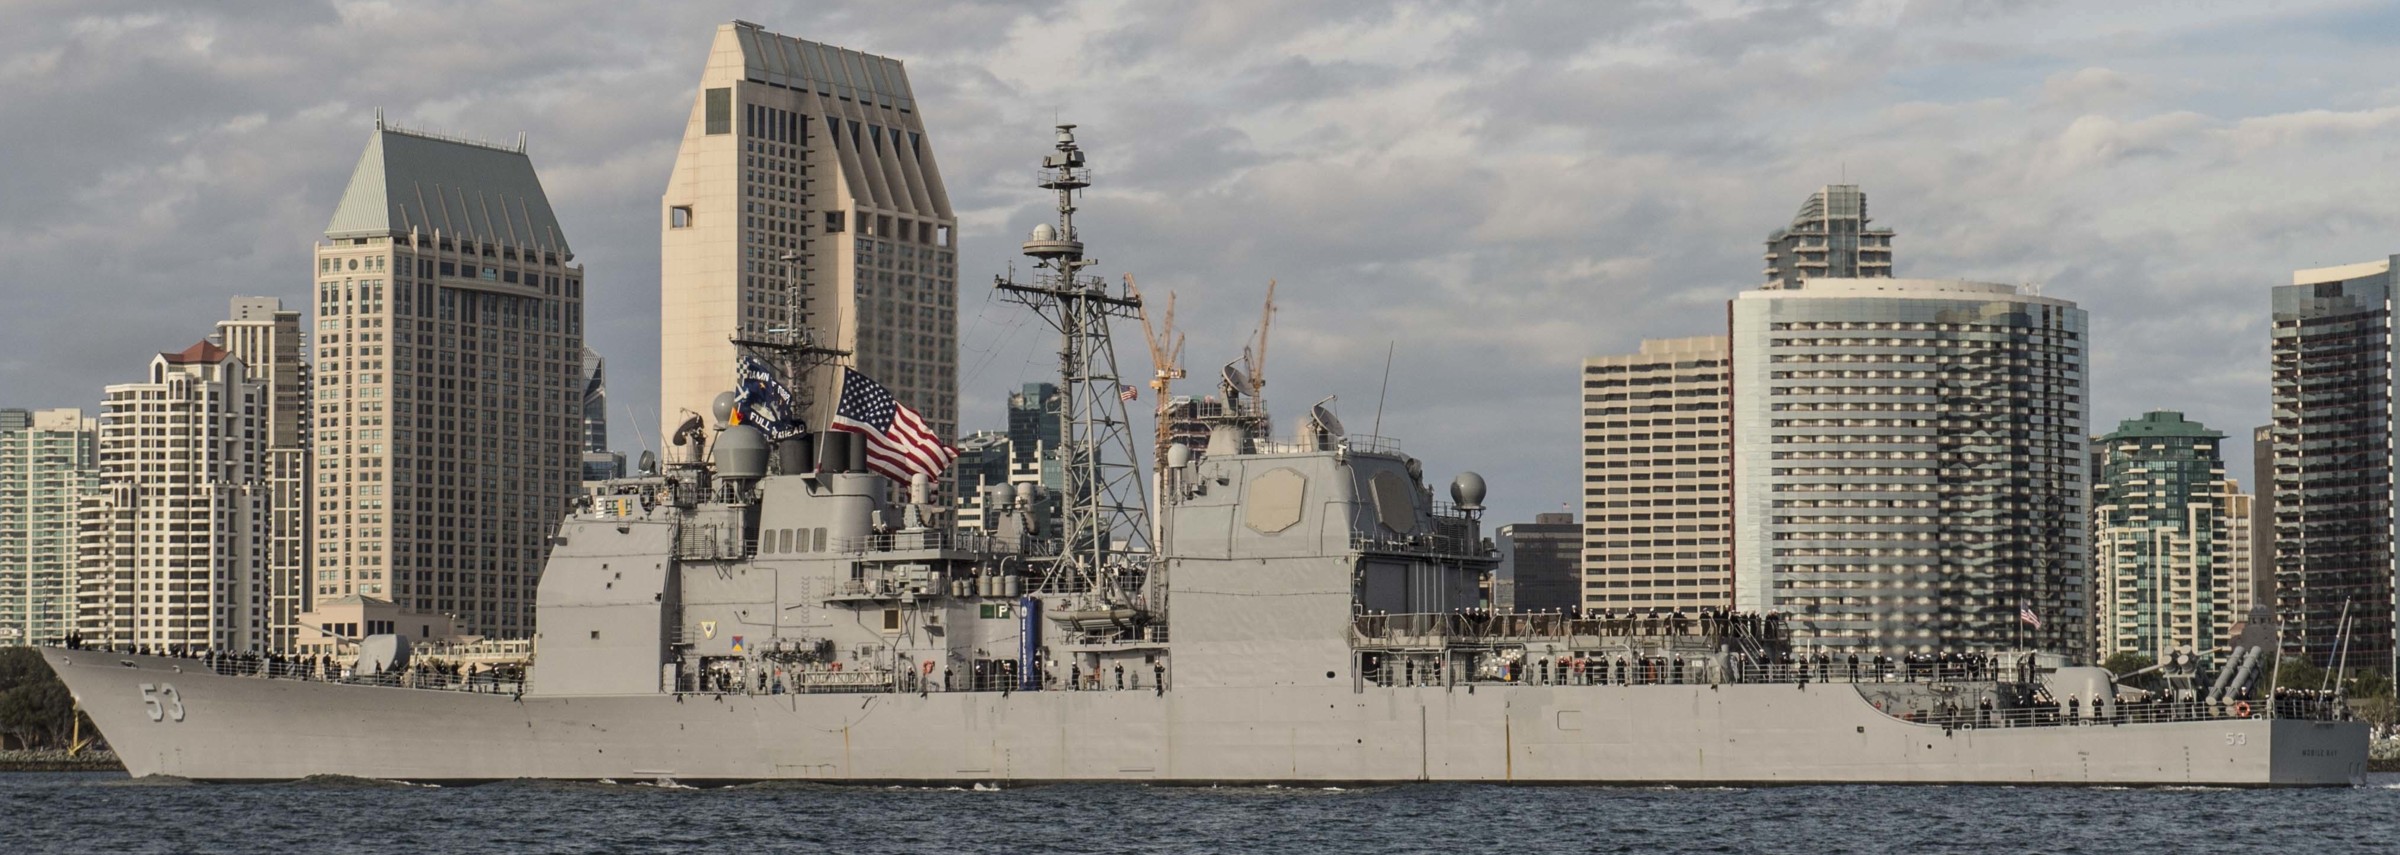 cg-53 uss mobile bay ticonderoga class guided missile cruiser aegis us navy departing san diego 84